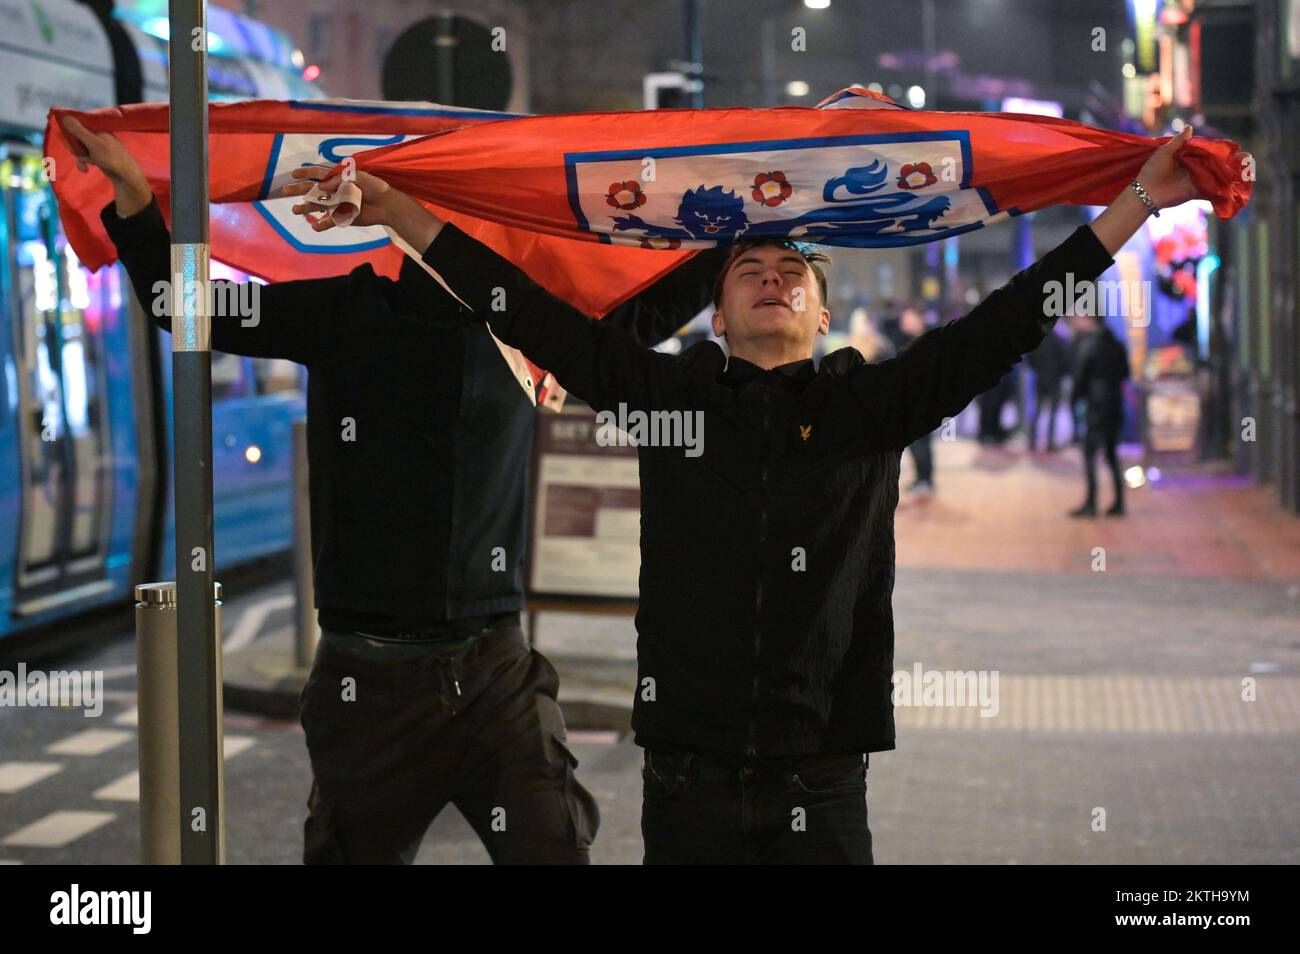 Broad Street, Birmingham, November 29th 2022 - Two England Fans walk joyously home with flags on Broad Street in Birmingham after England beat Wales 3-0 in the World Cup on Tuesday night. Pic by Credit: Sam Holiday/Alamy Live News Stock Photo